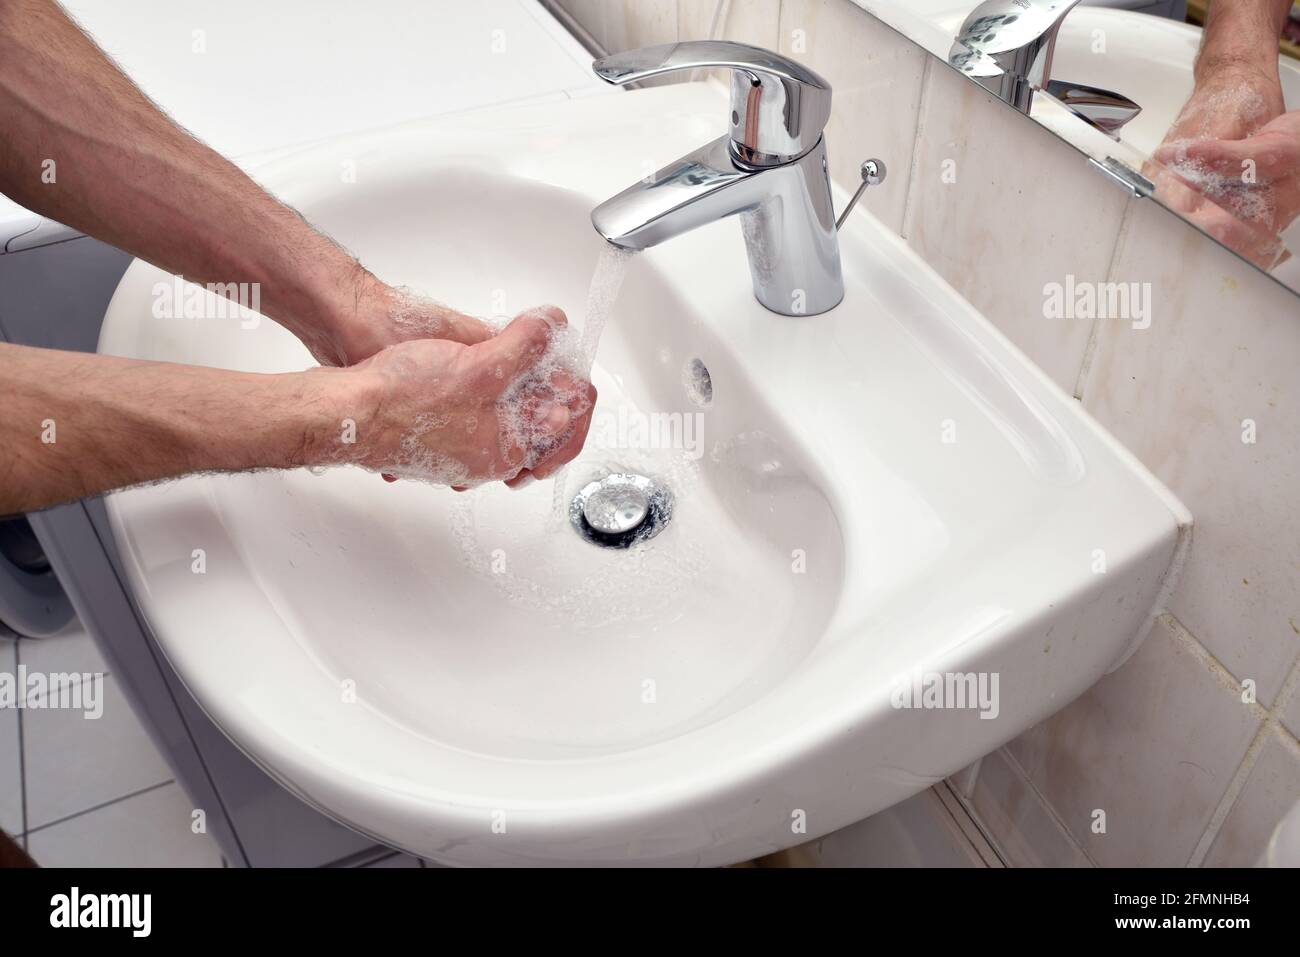 male washing hands to prevent corony virus disease spreading desinfection with soap and water Stock Photo